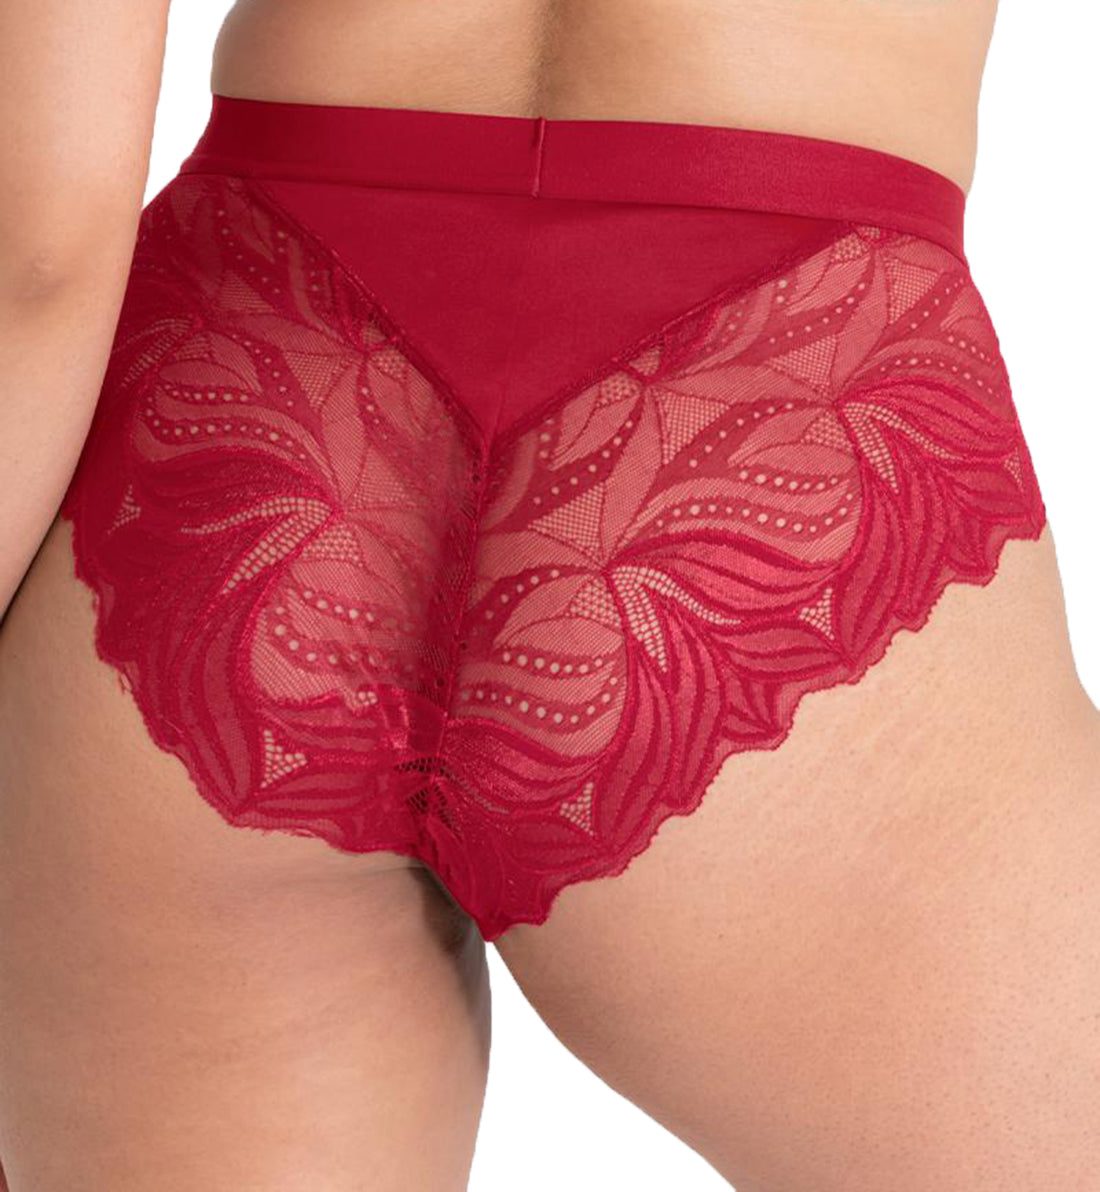 Scantilly by Curvy Kate Indulgence High Waist Brief (ST010208),Small,Red - Red,Small